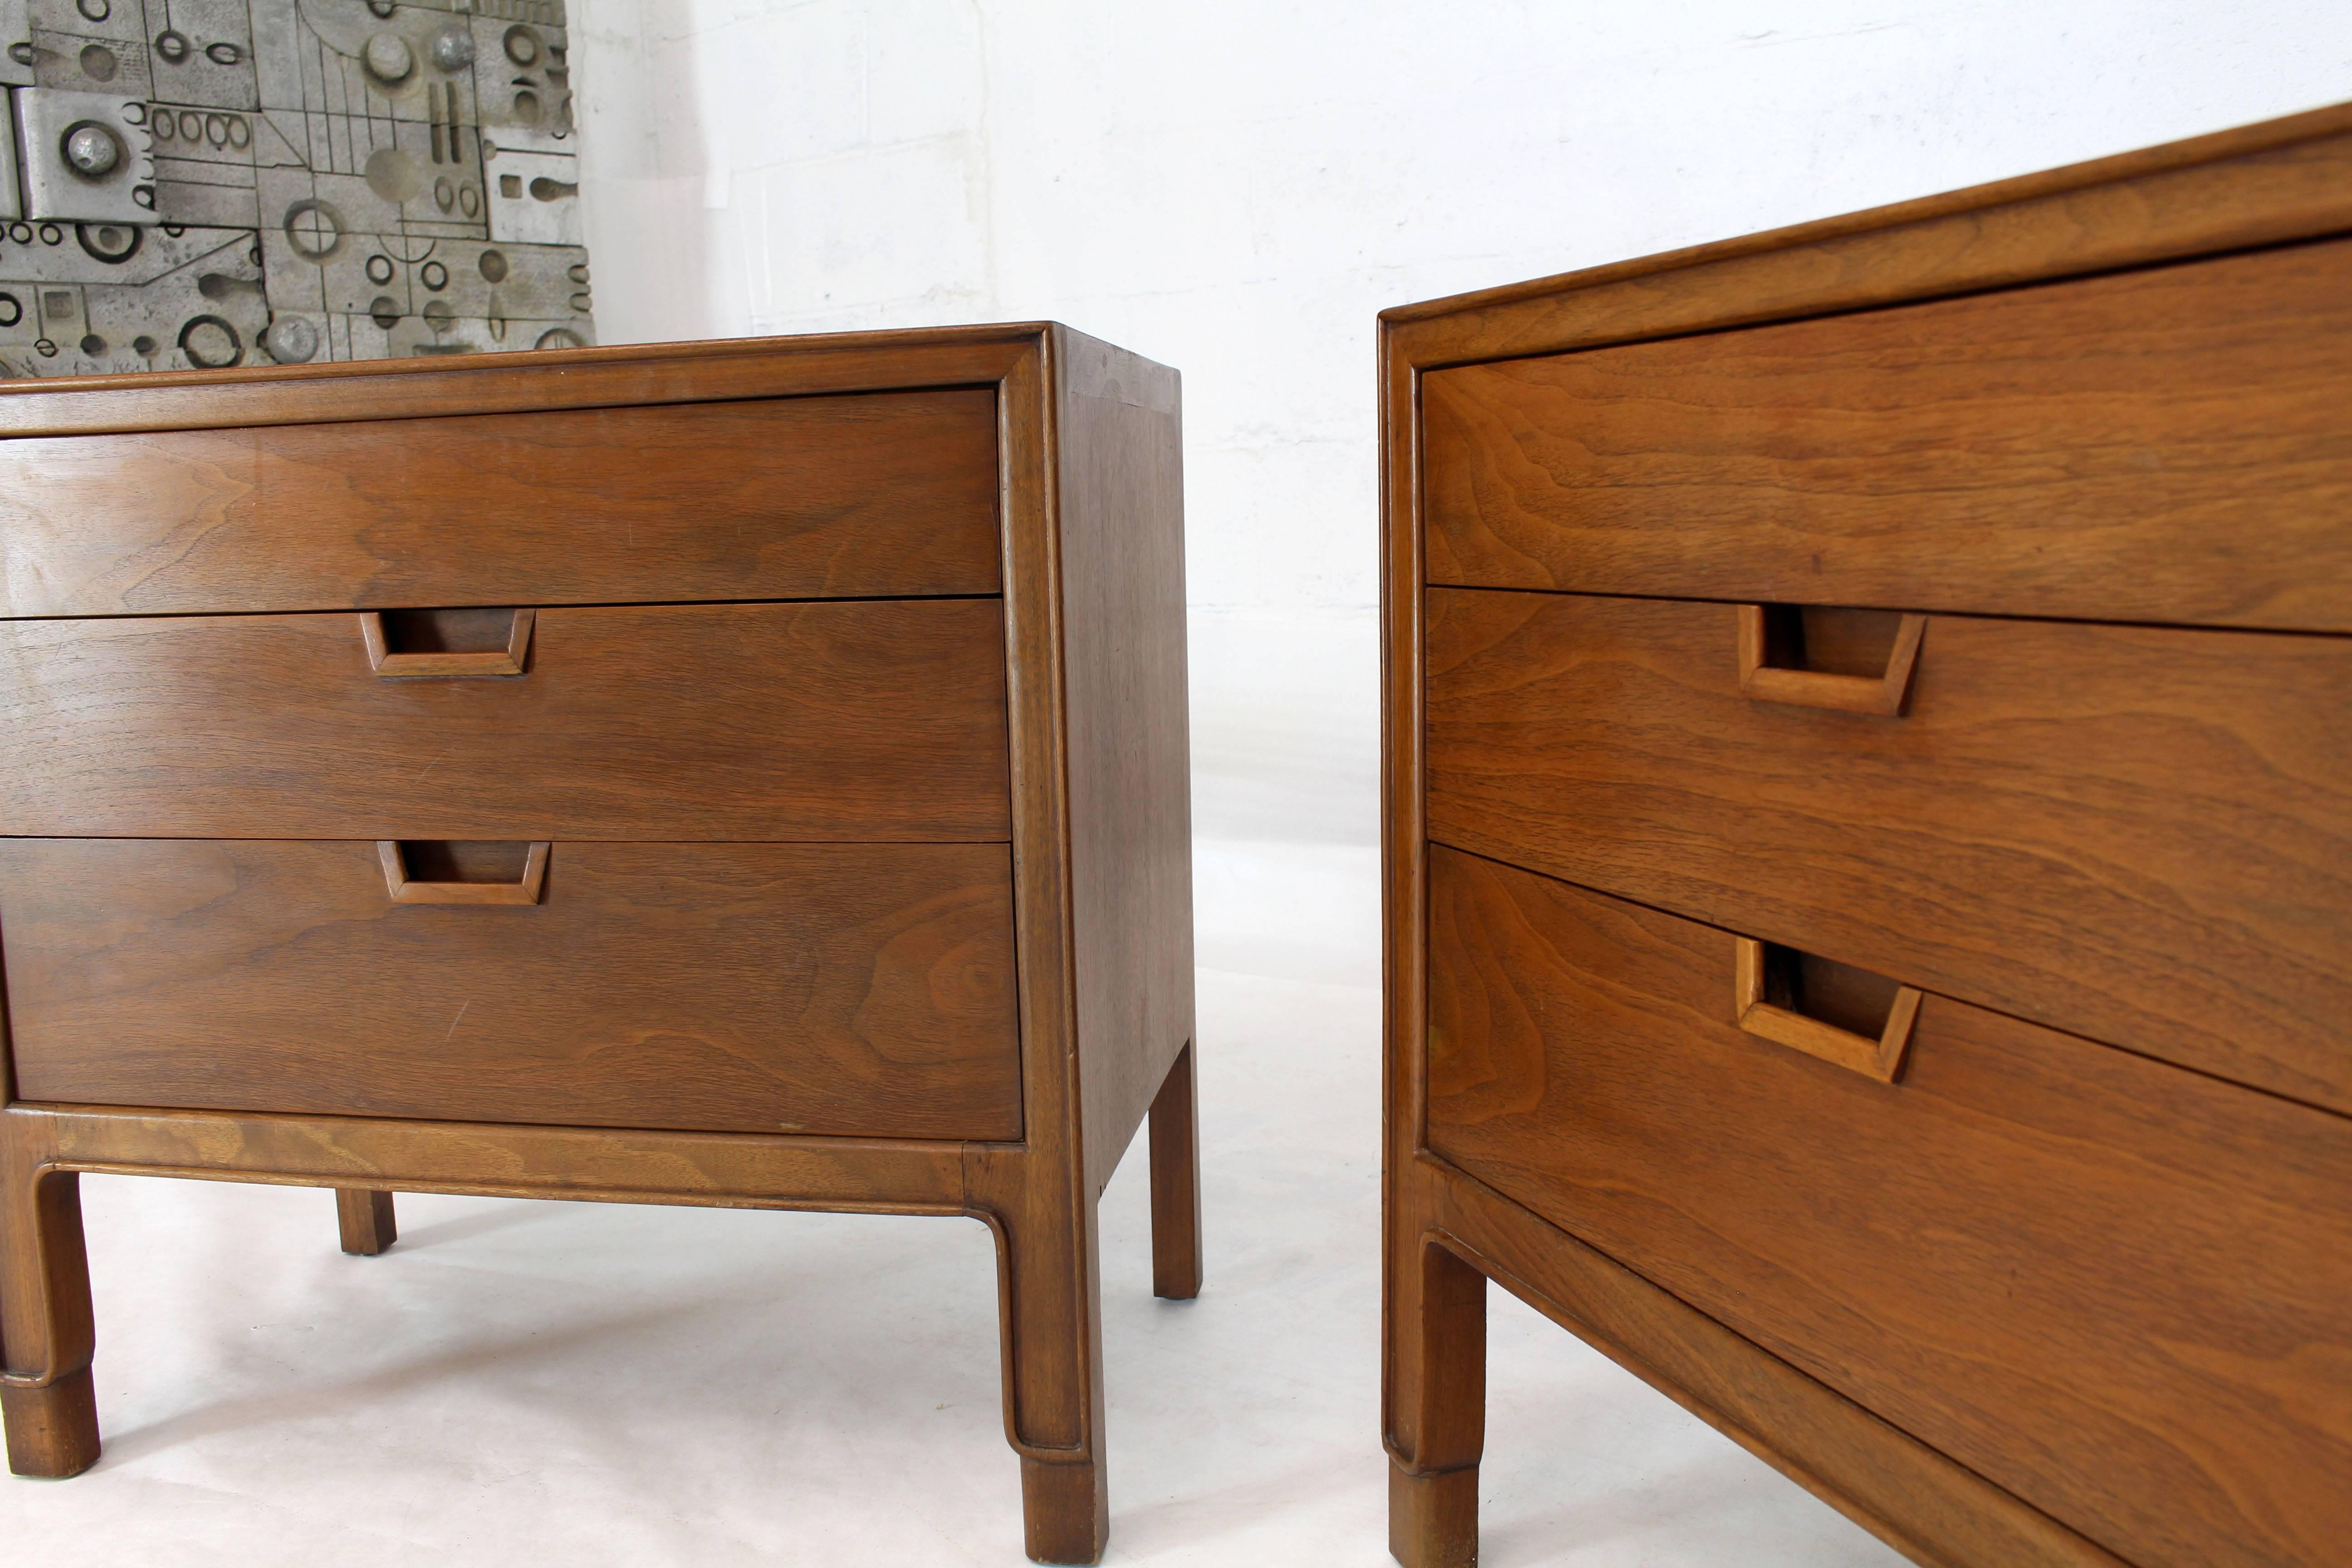 Pair of walnut Mid-Century Modern three-drawer end tables with beautiful solid walnut pulls. Nice carved detail near the bottom of the legs showing the solid structure and nature of the solid walnut wood.